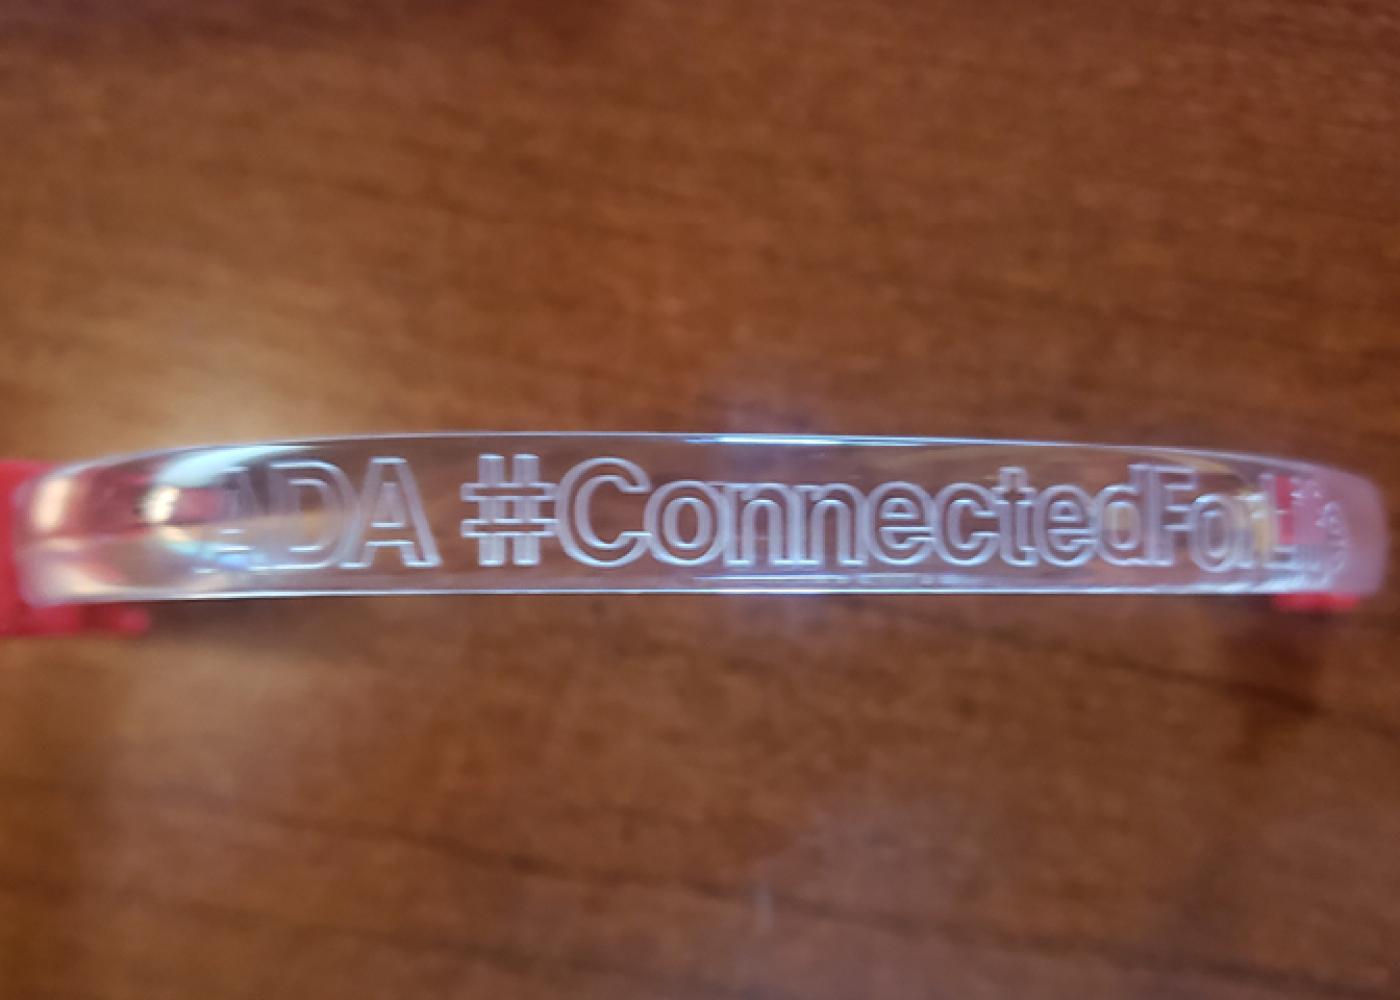 Close-up of ADA#Connected acrylic wrist band